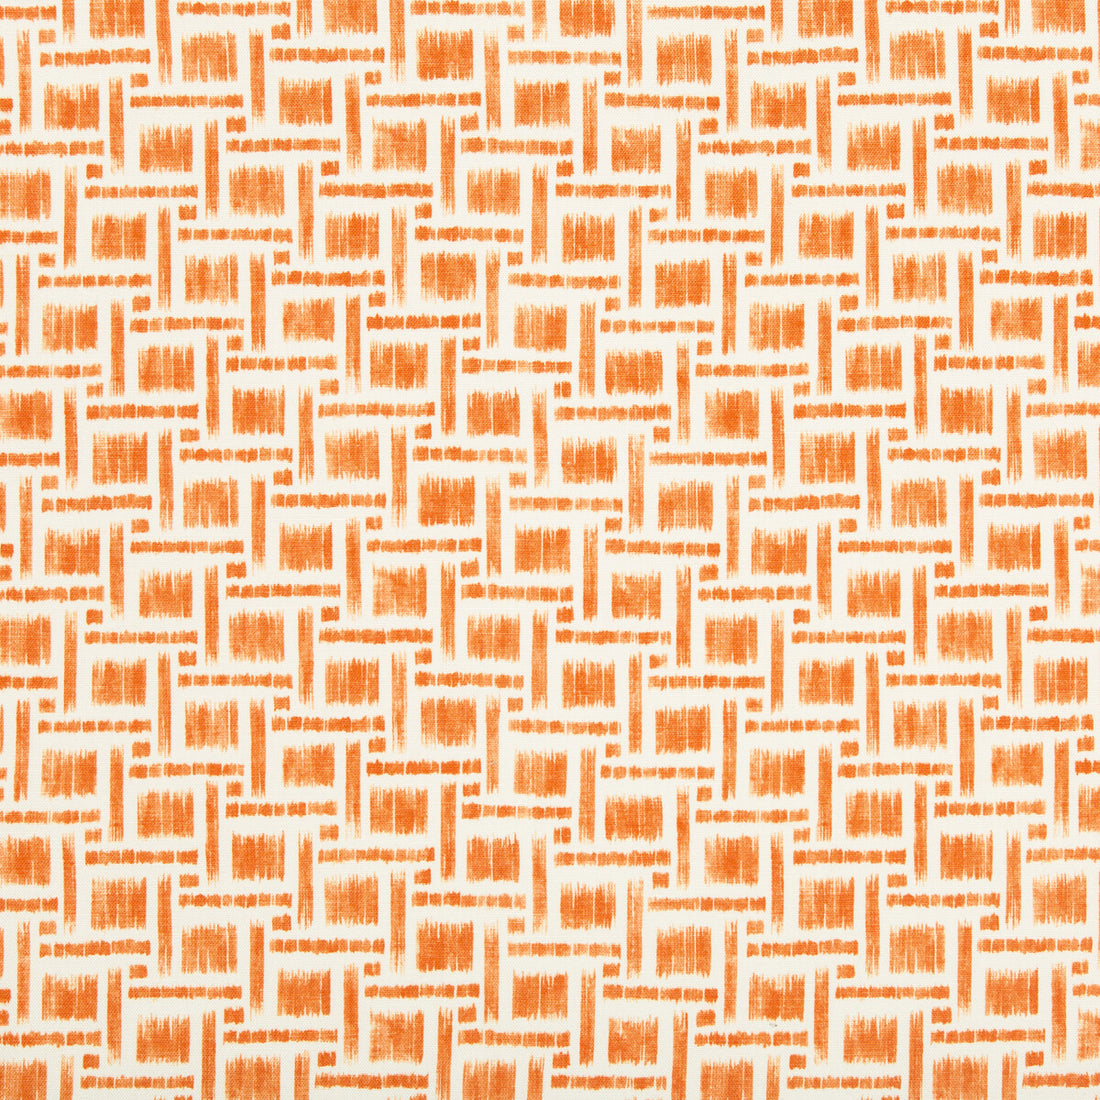 Mira Print fabric in orange color - pattern 8019135.12.0 - by Brunschwig &amp; Fils in the Summer Palace collection